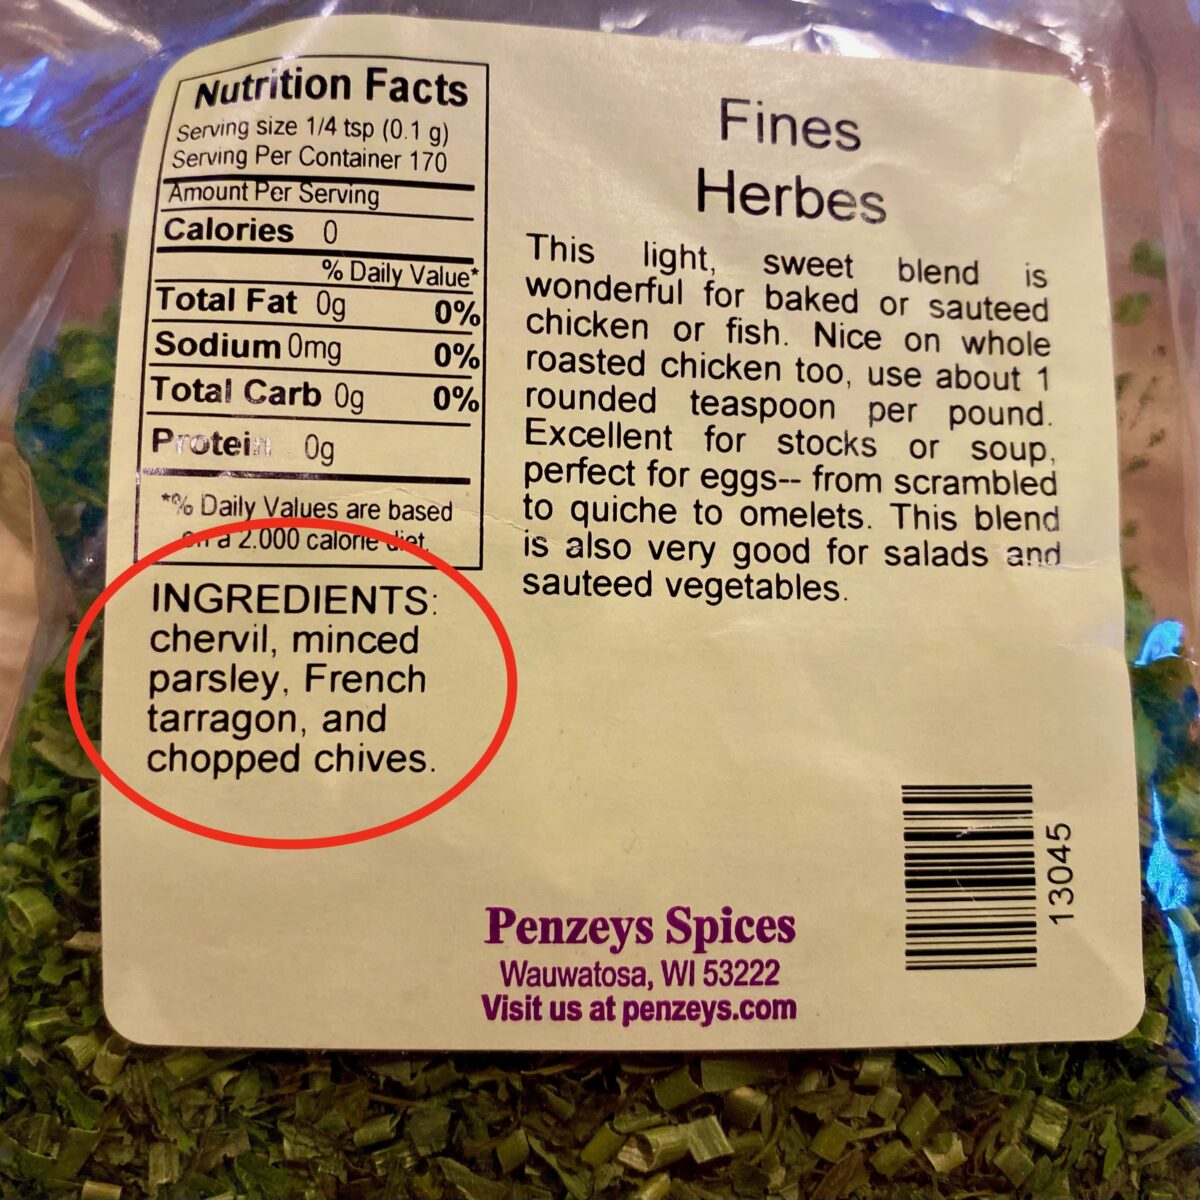 Close up view of the herb mixture package I use to make chicken salad with relish. The herb ingredients include: Chervil, minced parsley, tarragon, and chopped chives.